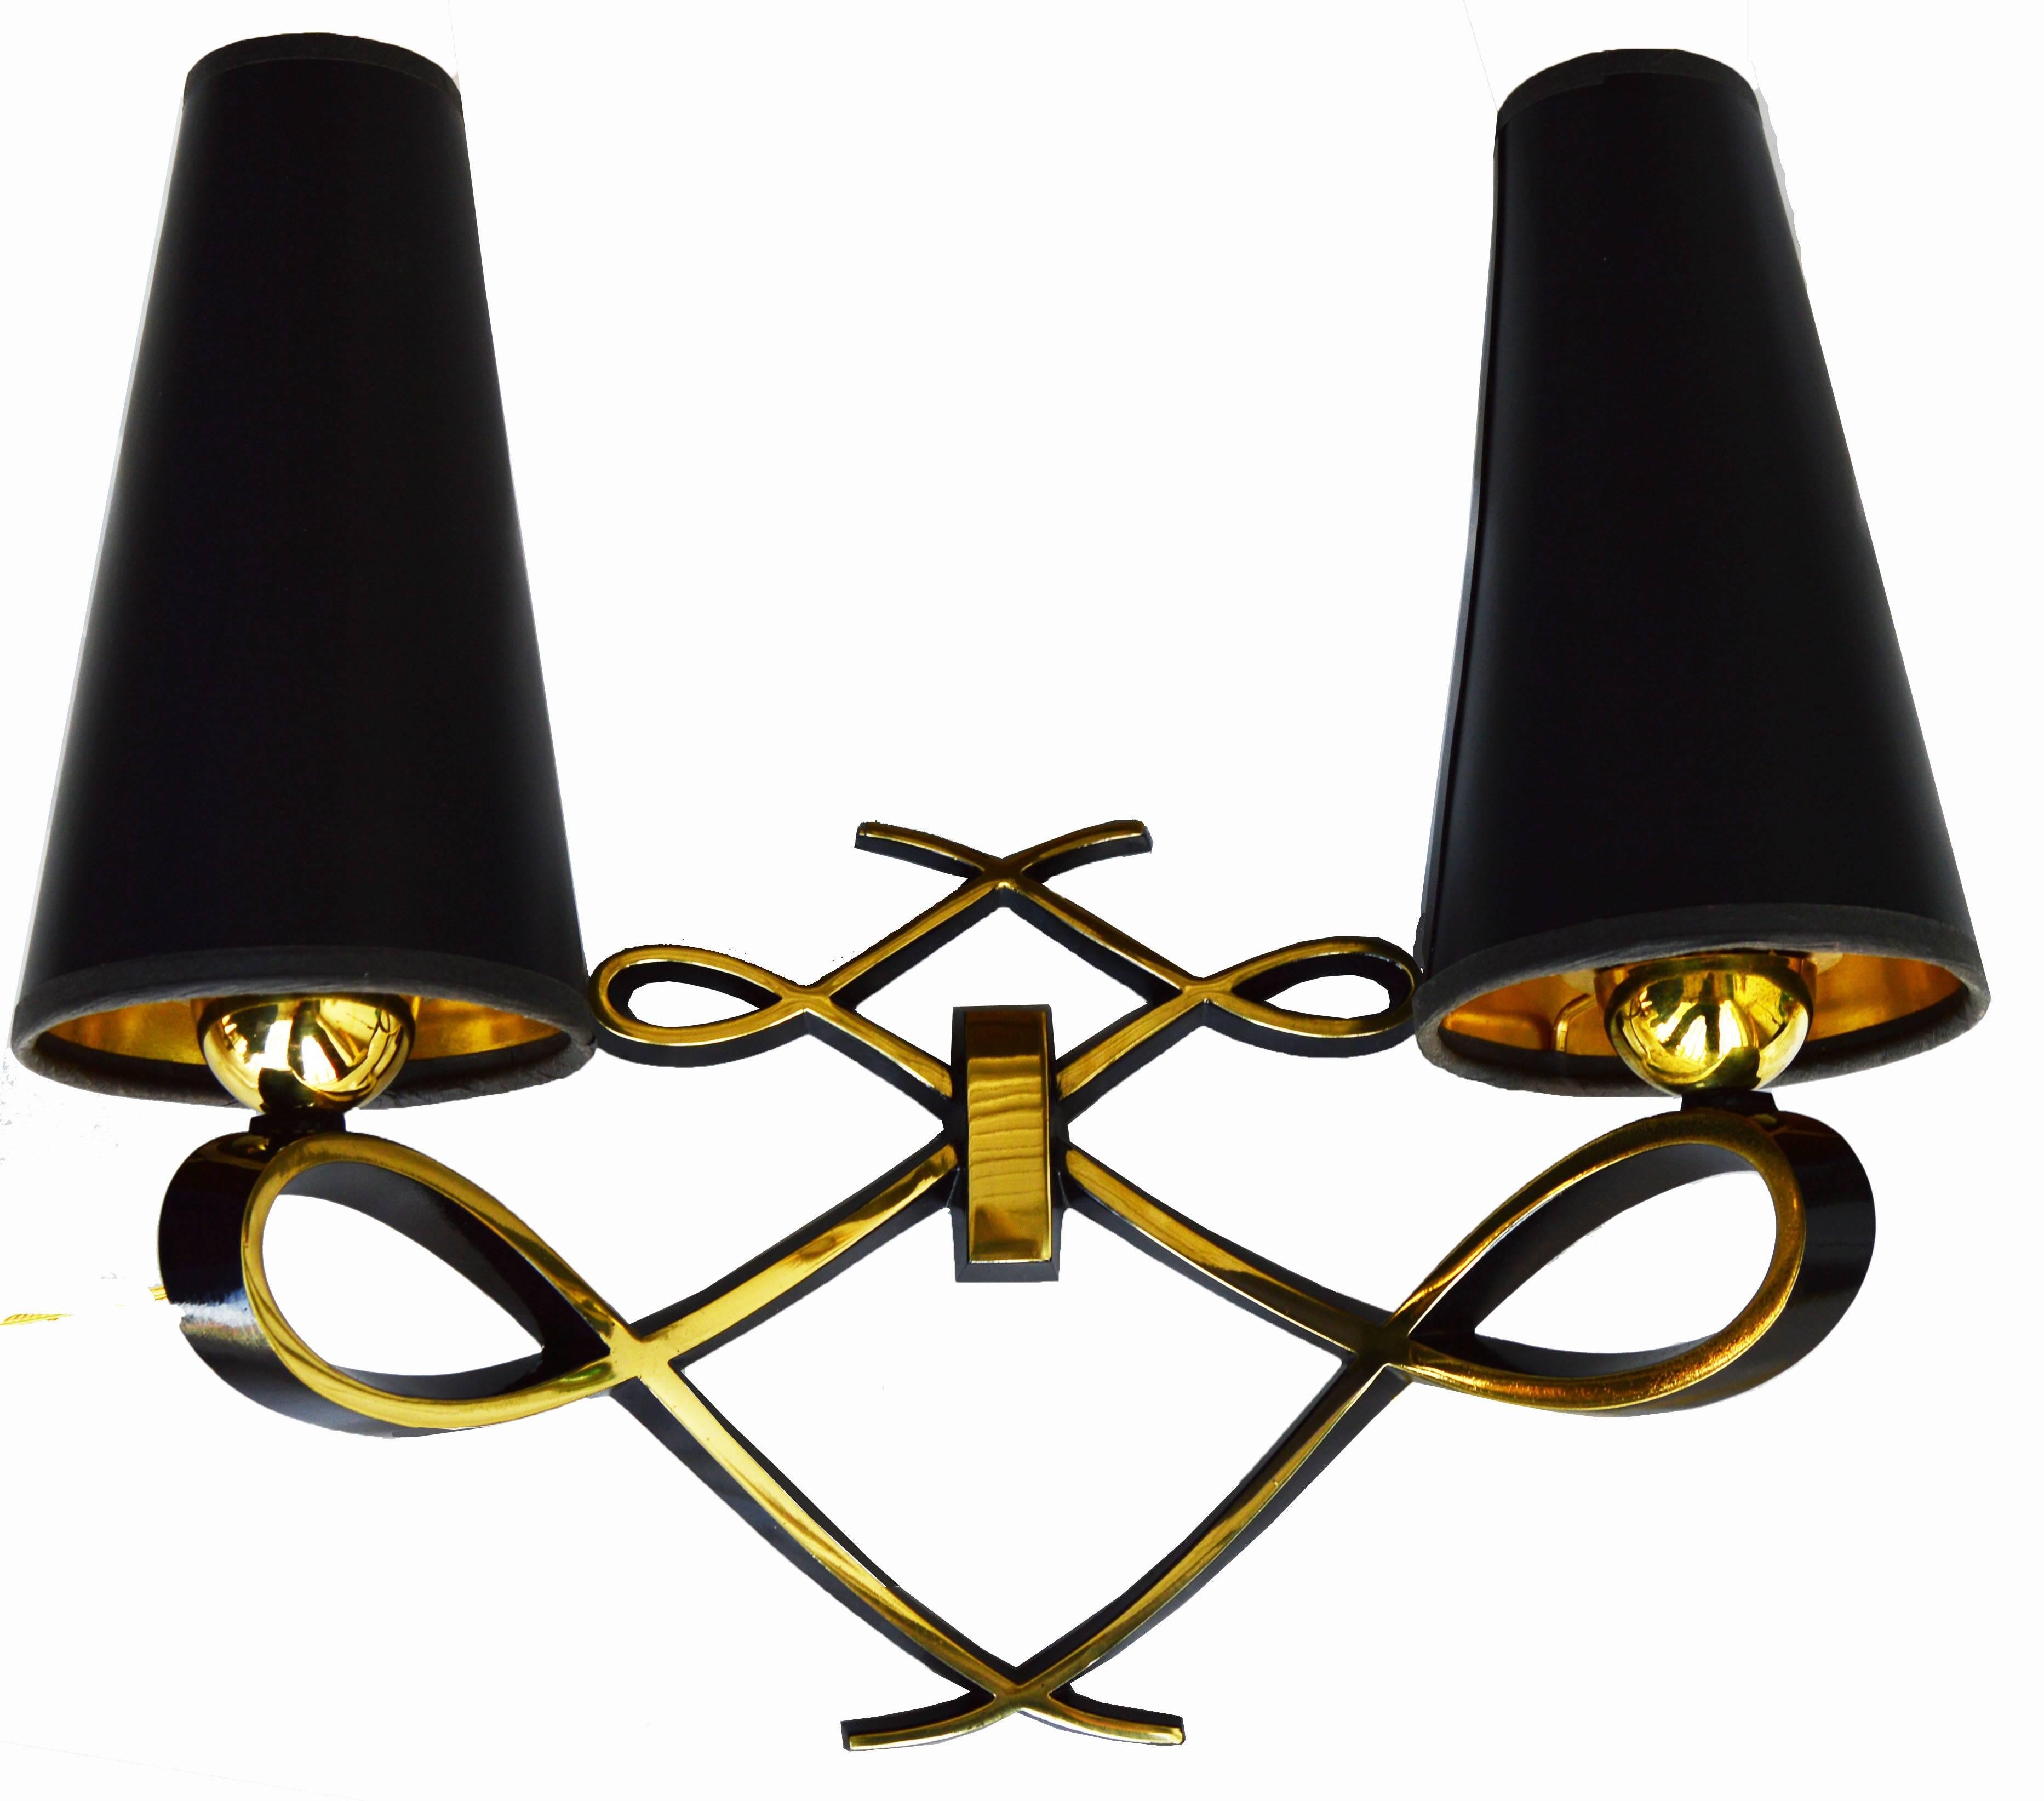 Mid-20th Century Maison Arlus Pair of Sconces  3 pairs available, . Priced by pair